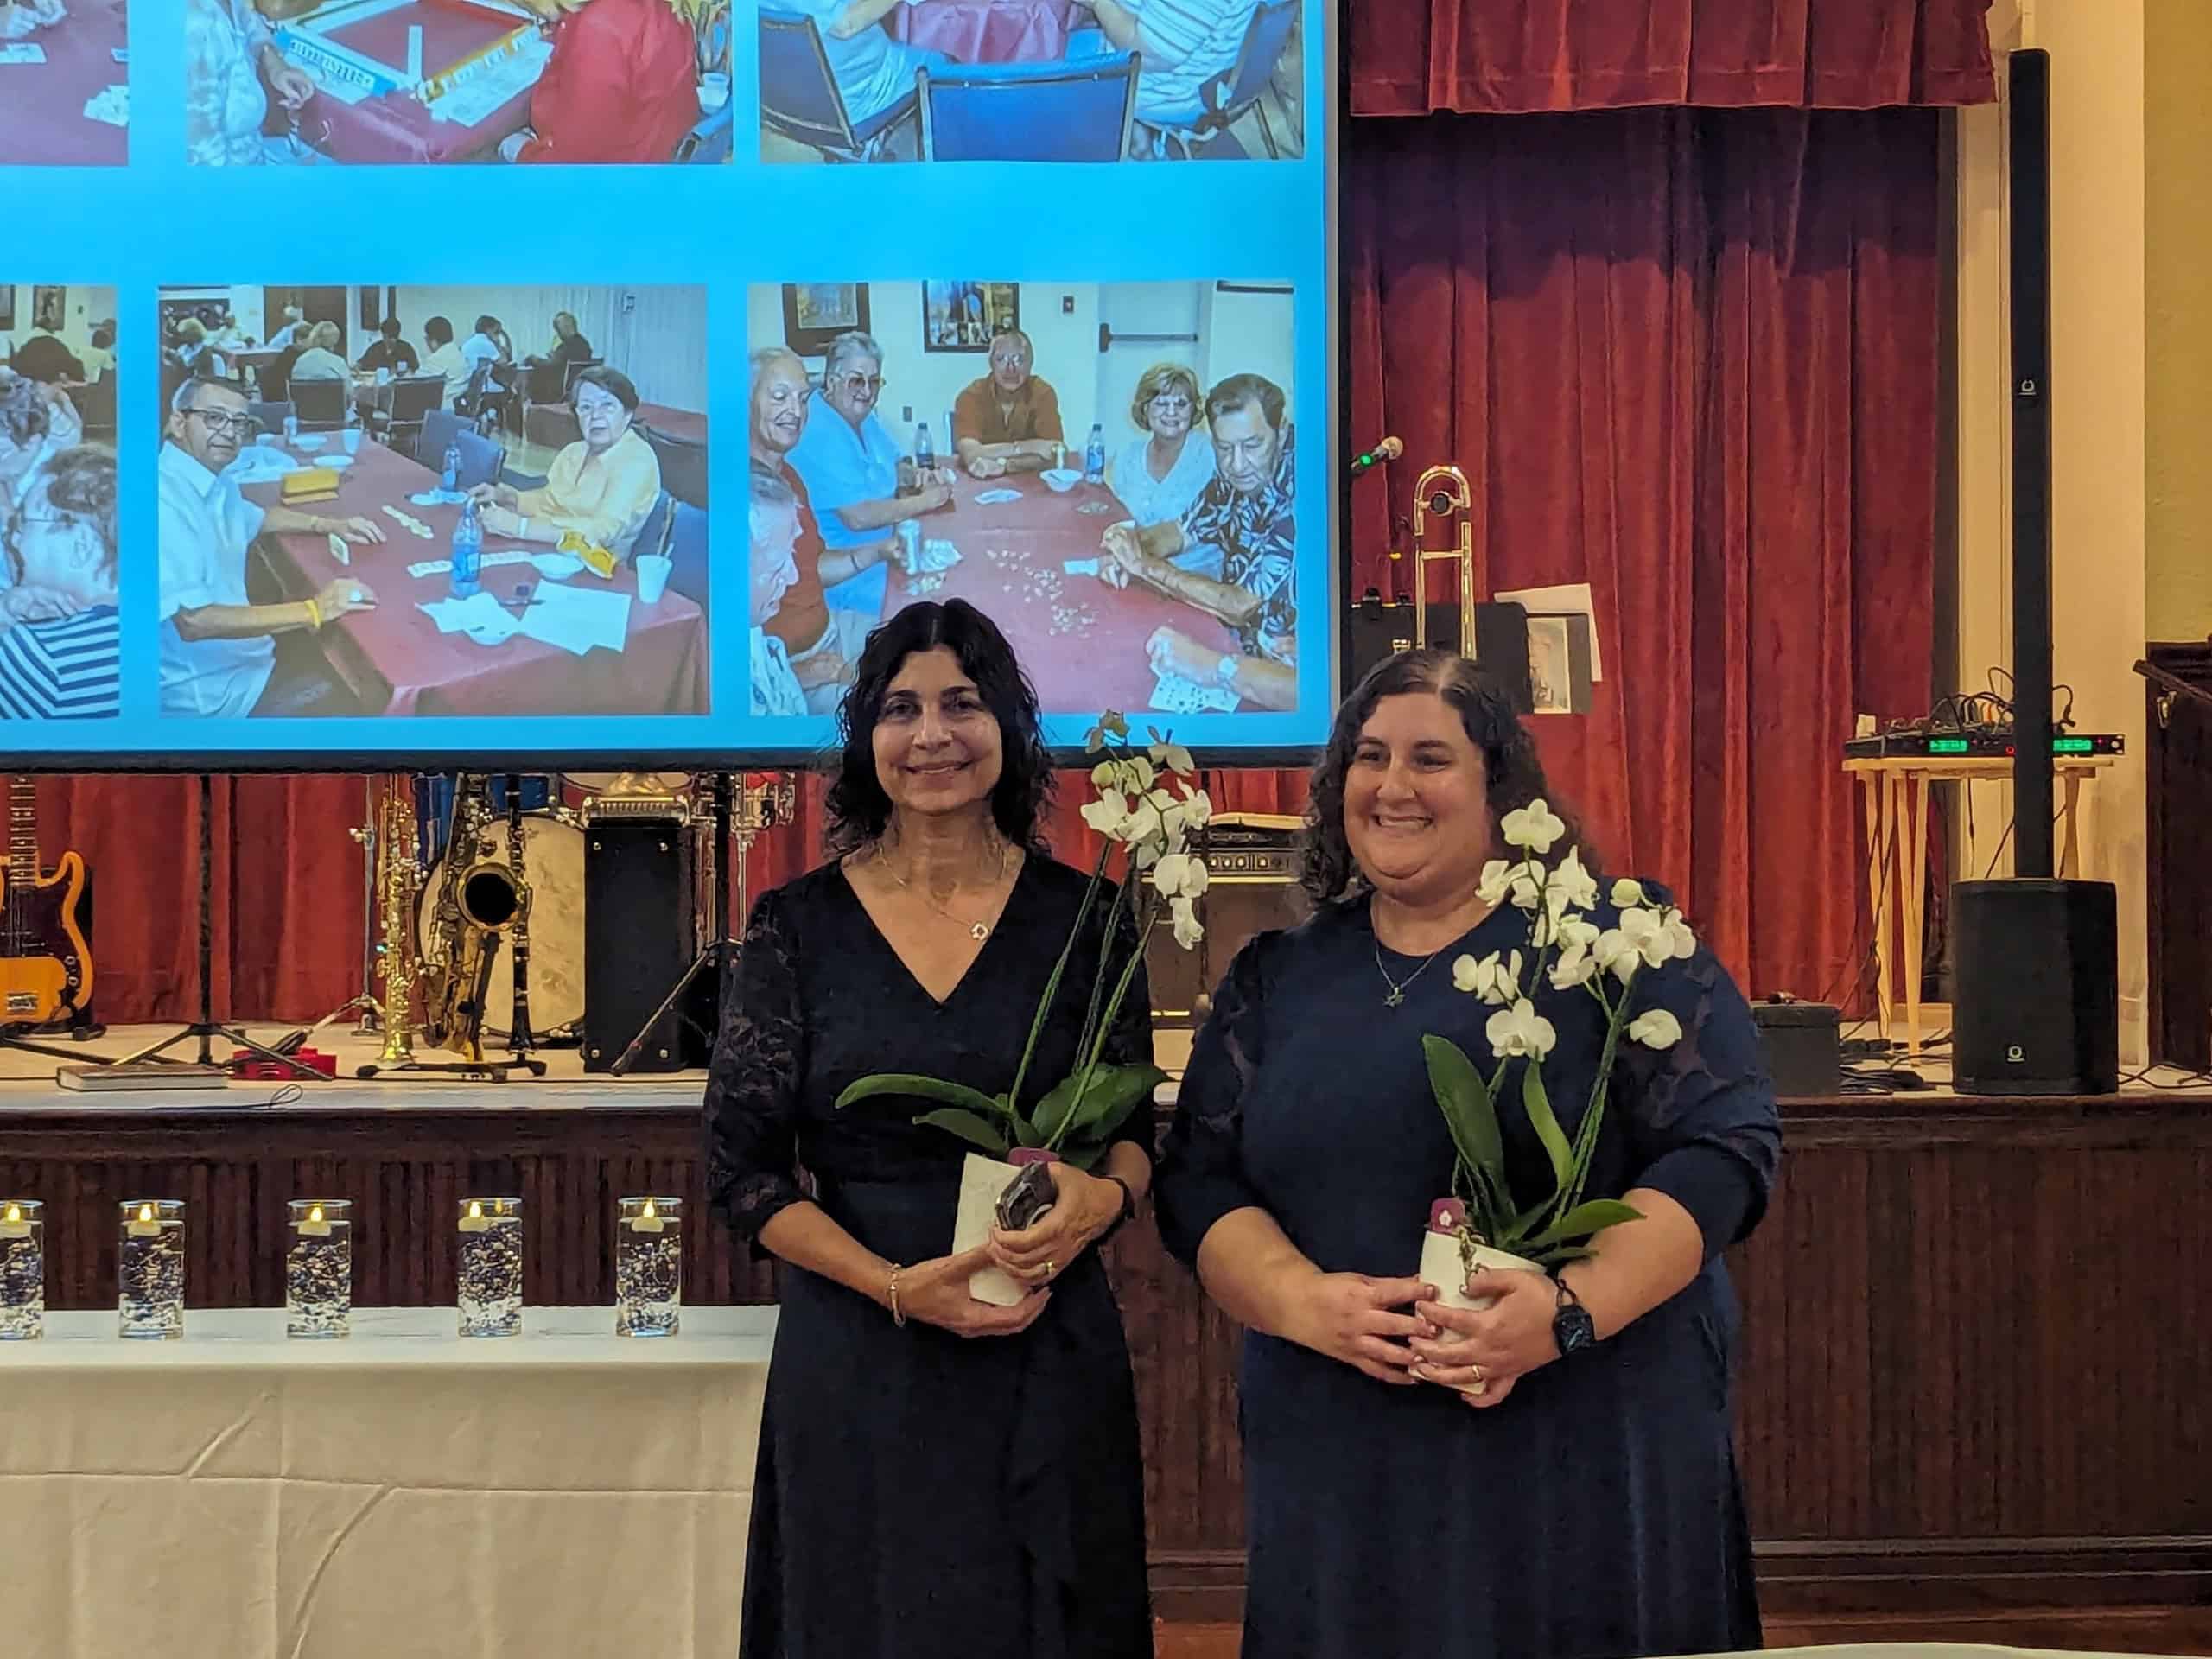 Heidi Shilensky, left and Nava Cohen are honored for their efforts to organize Temple Beth David's 50th Anniversary Gala. [Photo by Julie Maglio]